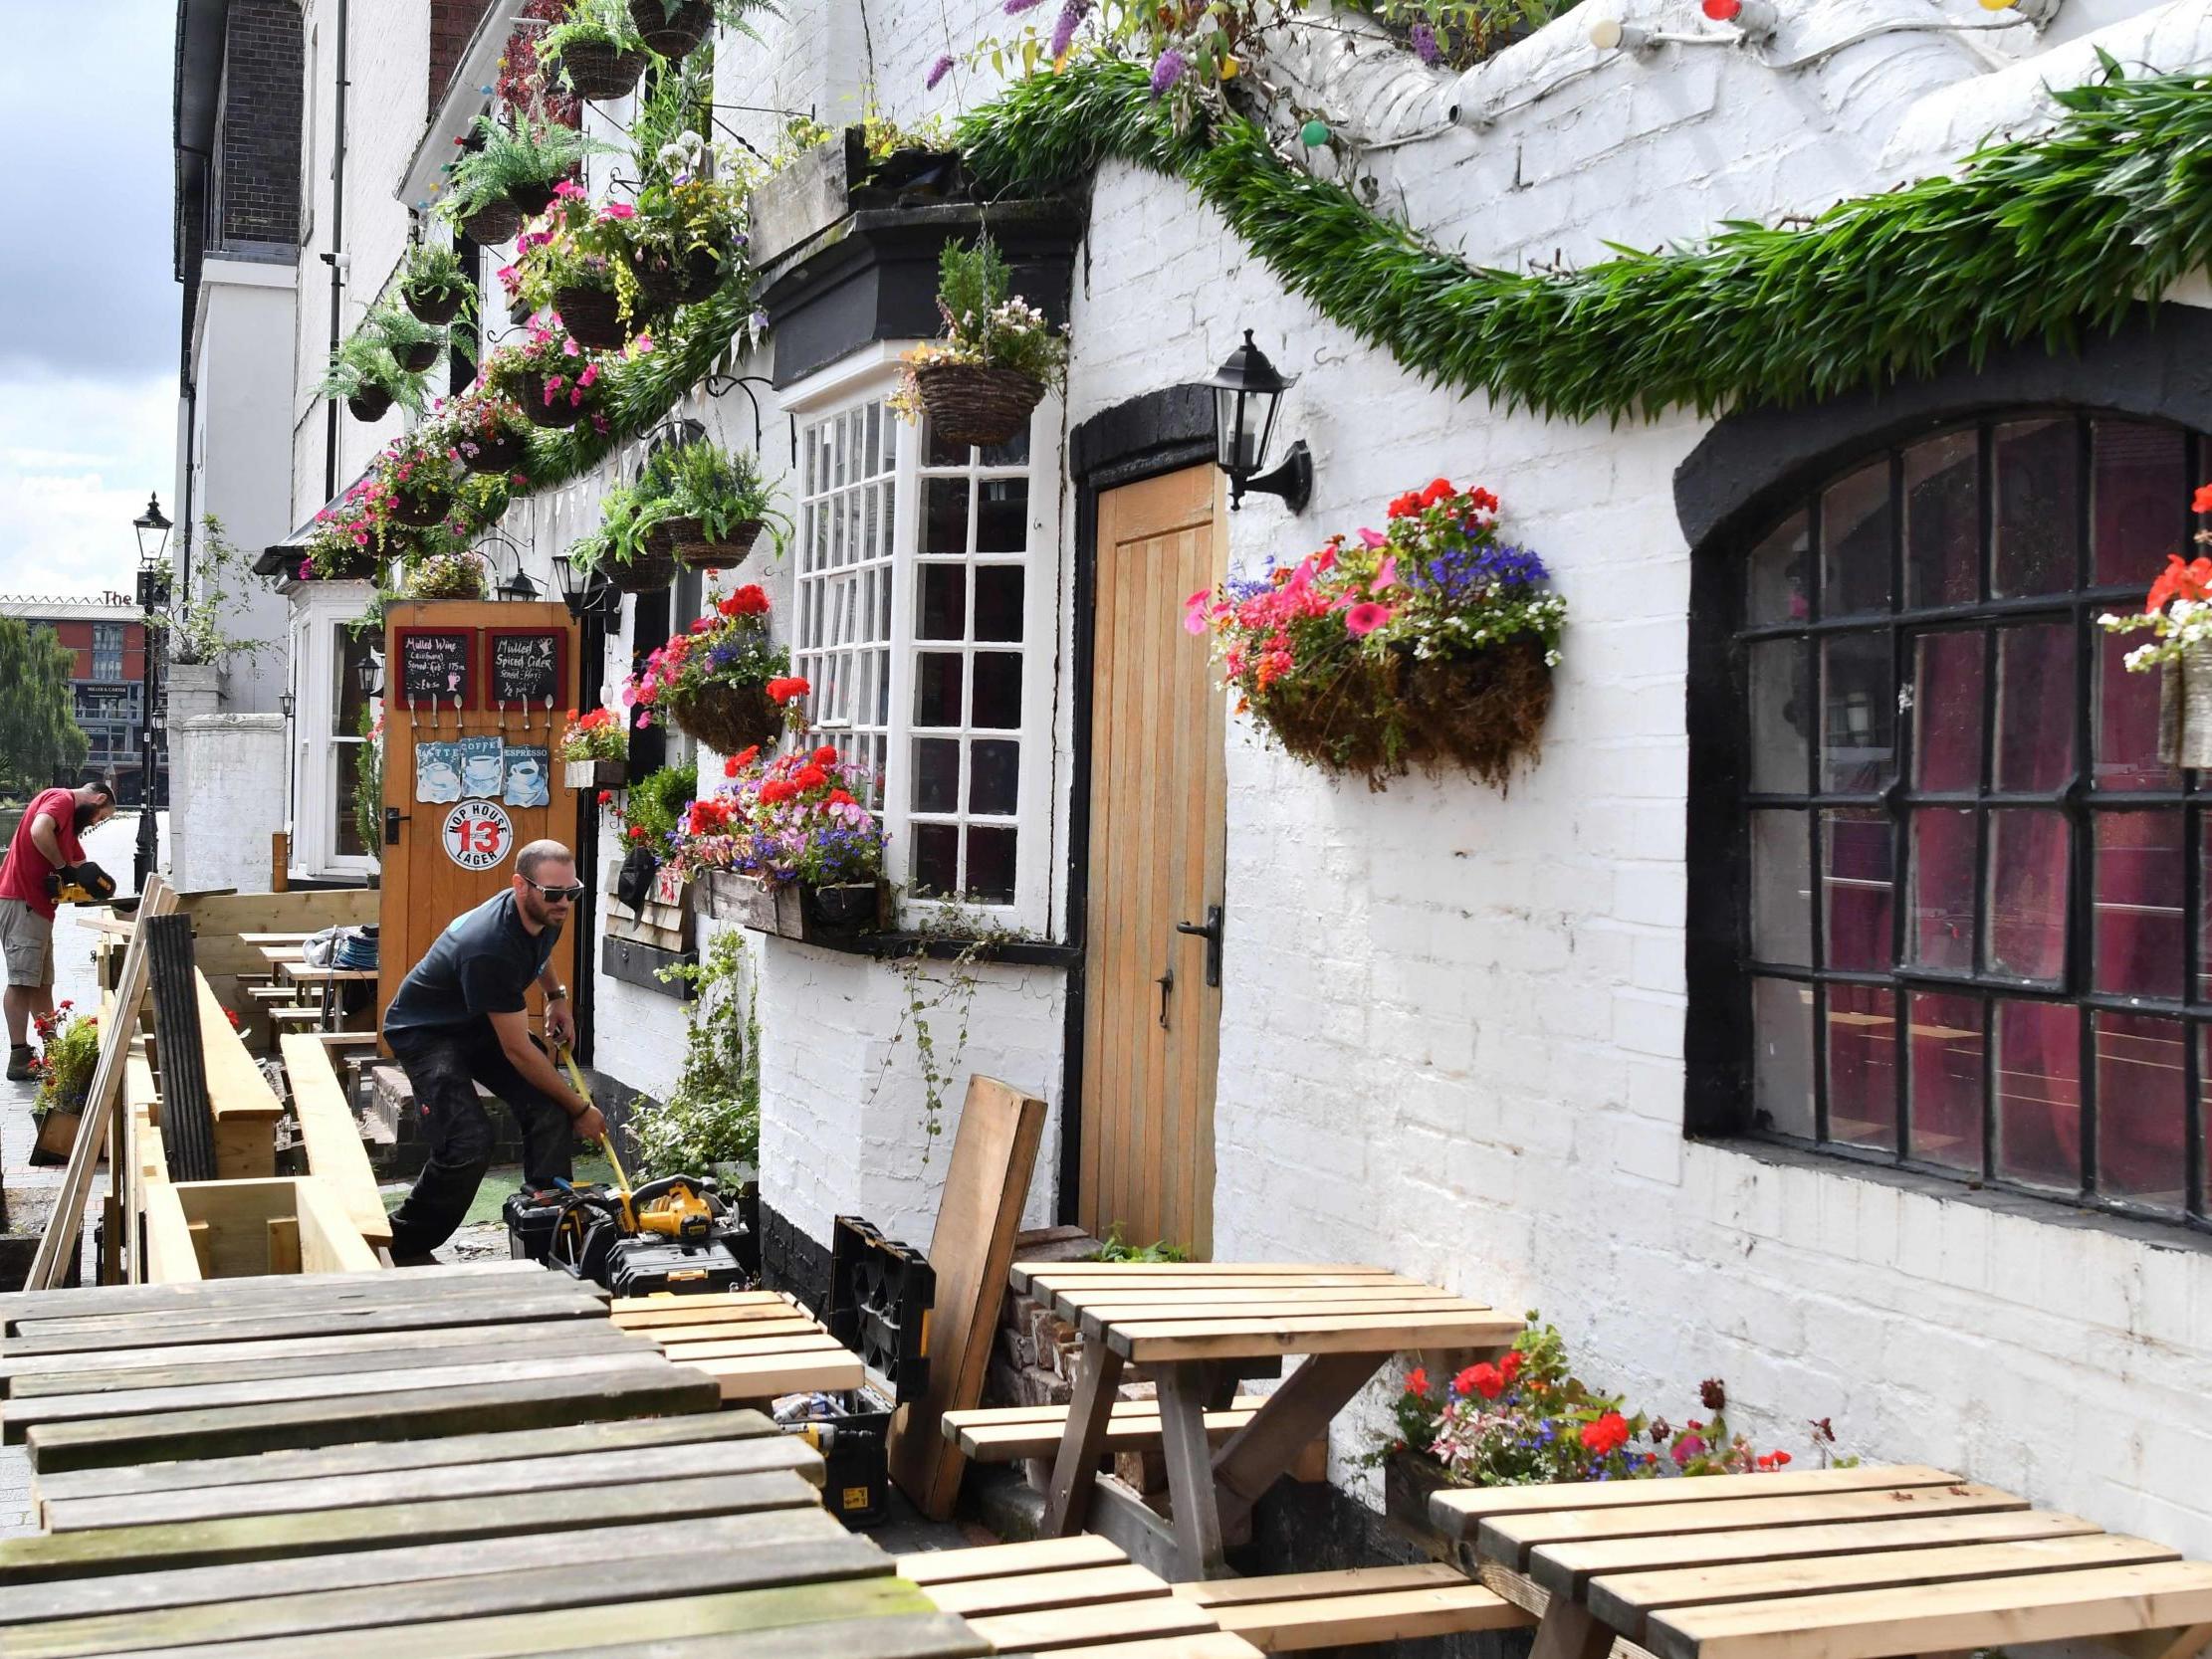 Workers prepare an outdoor seating area at a pub in Birmingham on 2 July, 2020, ahead of "super Saturday".